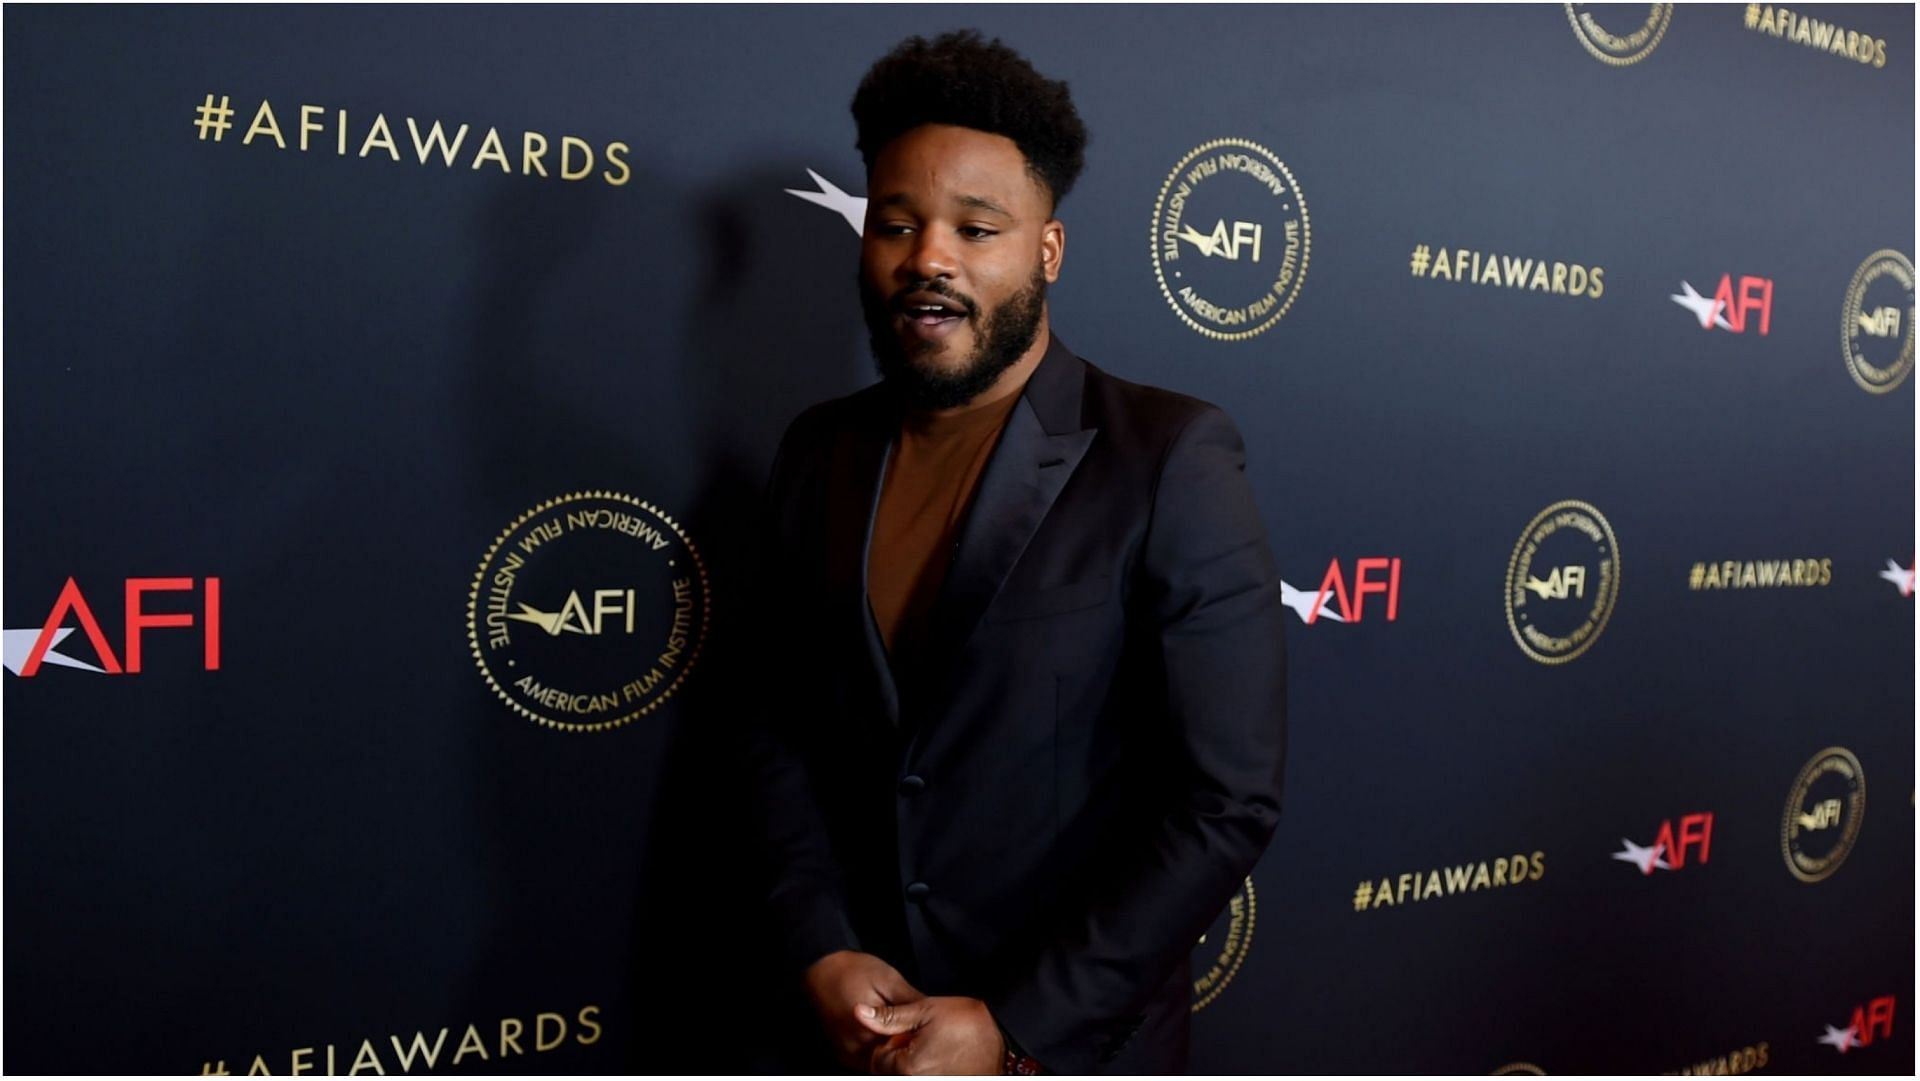 Ryan Coogler was not willing to work after Chadwick Boseman